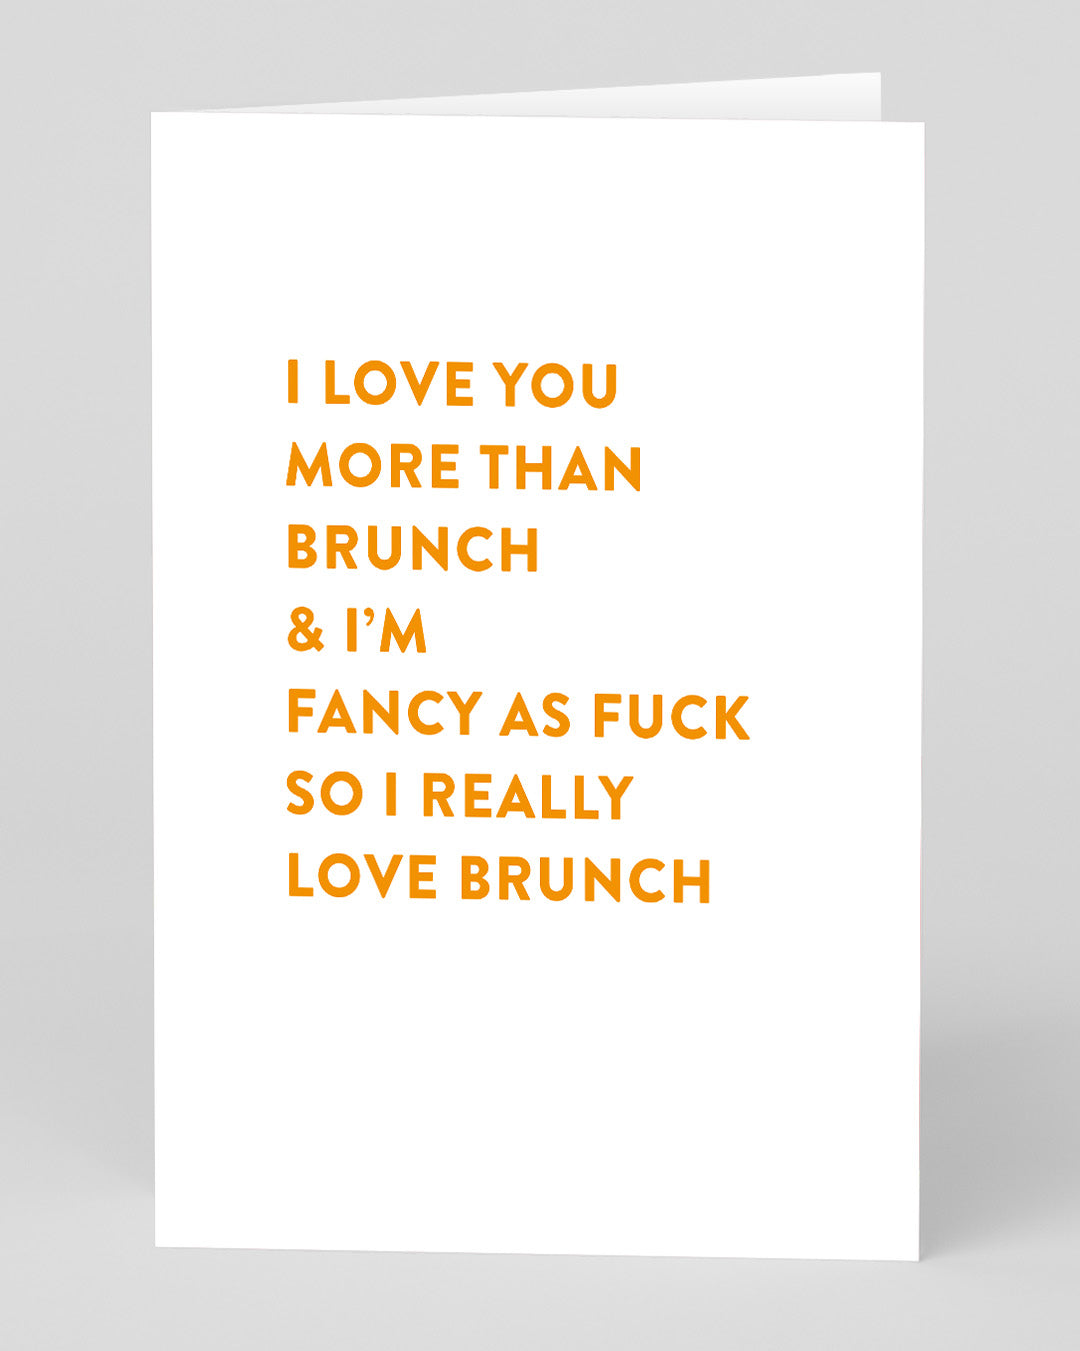 Valentine’s Day | Funny Valentines Card For Brunch Lovers | Personalised Brunch Greeting Card | Ohh Deer Unique Valentine’s Card for Him or Her | Made In The UK, Eco-Friendly Materials, Plastic Free Packaging